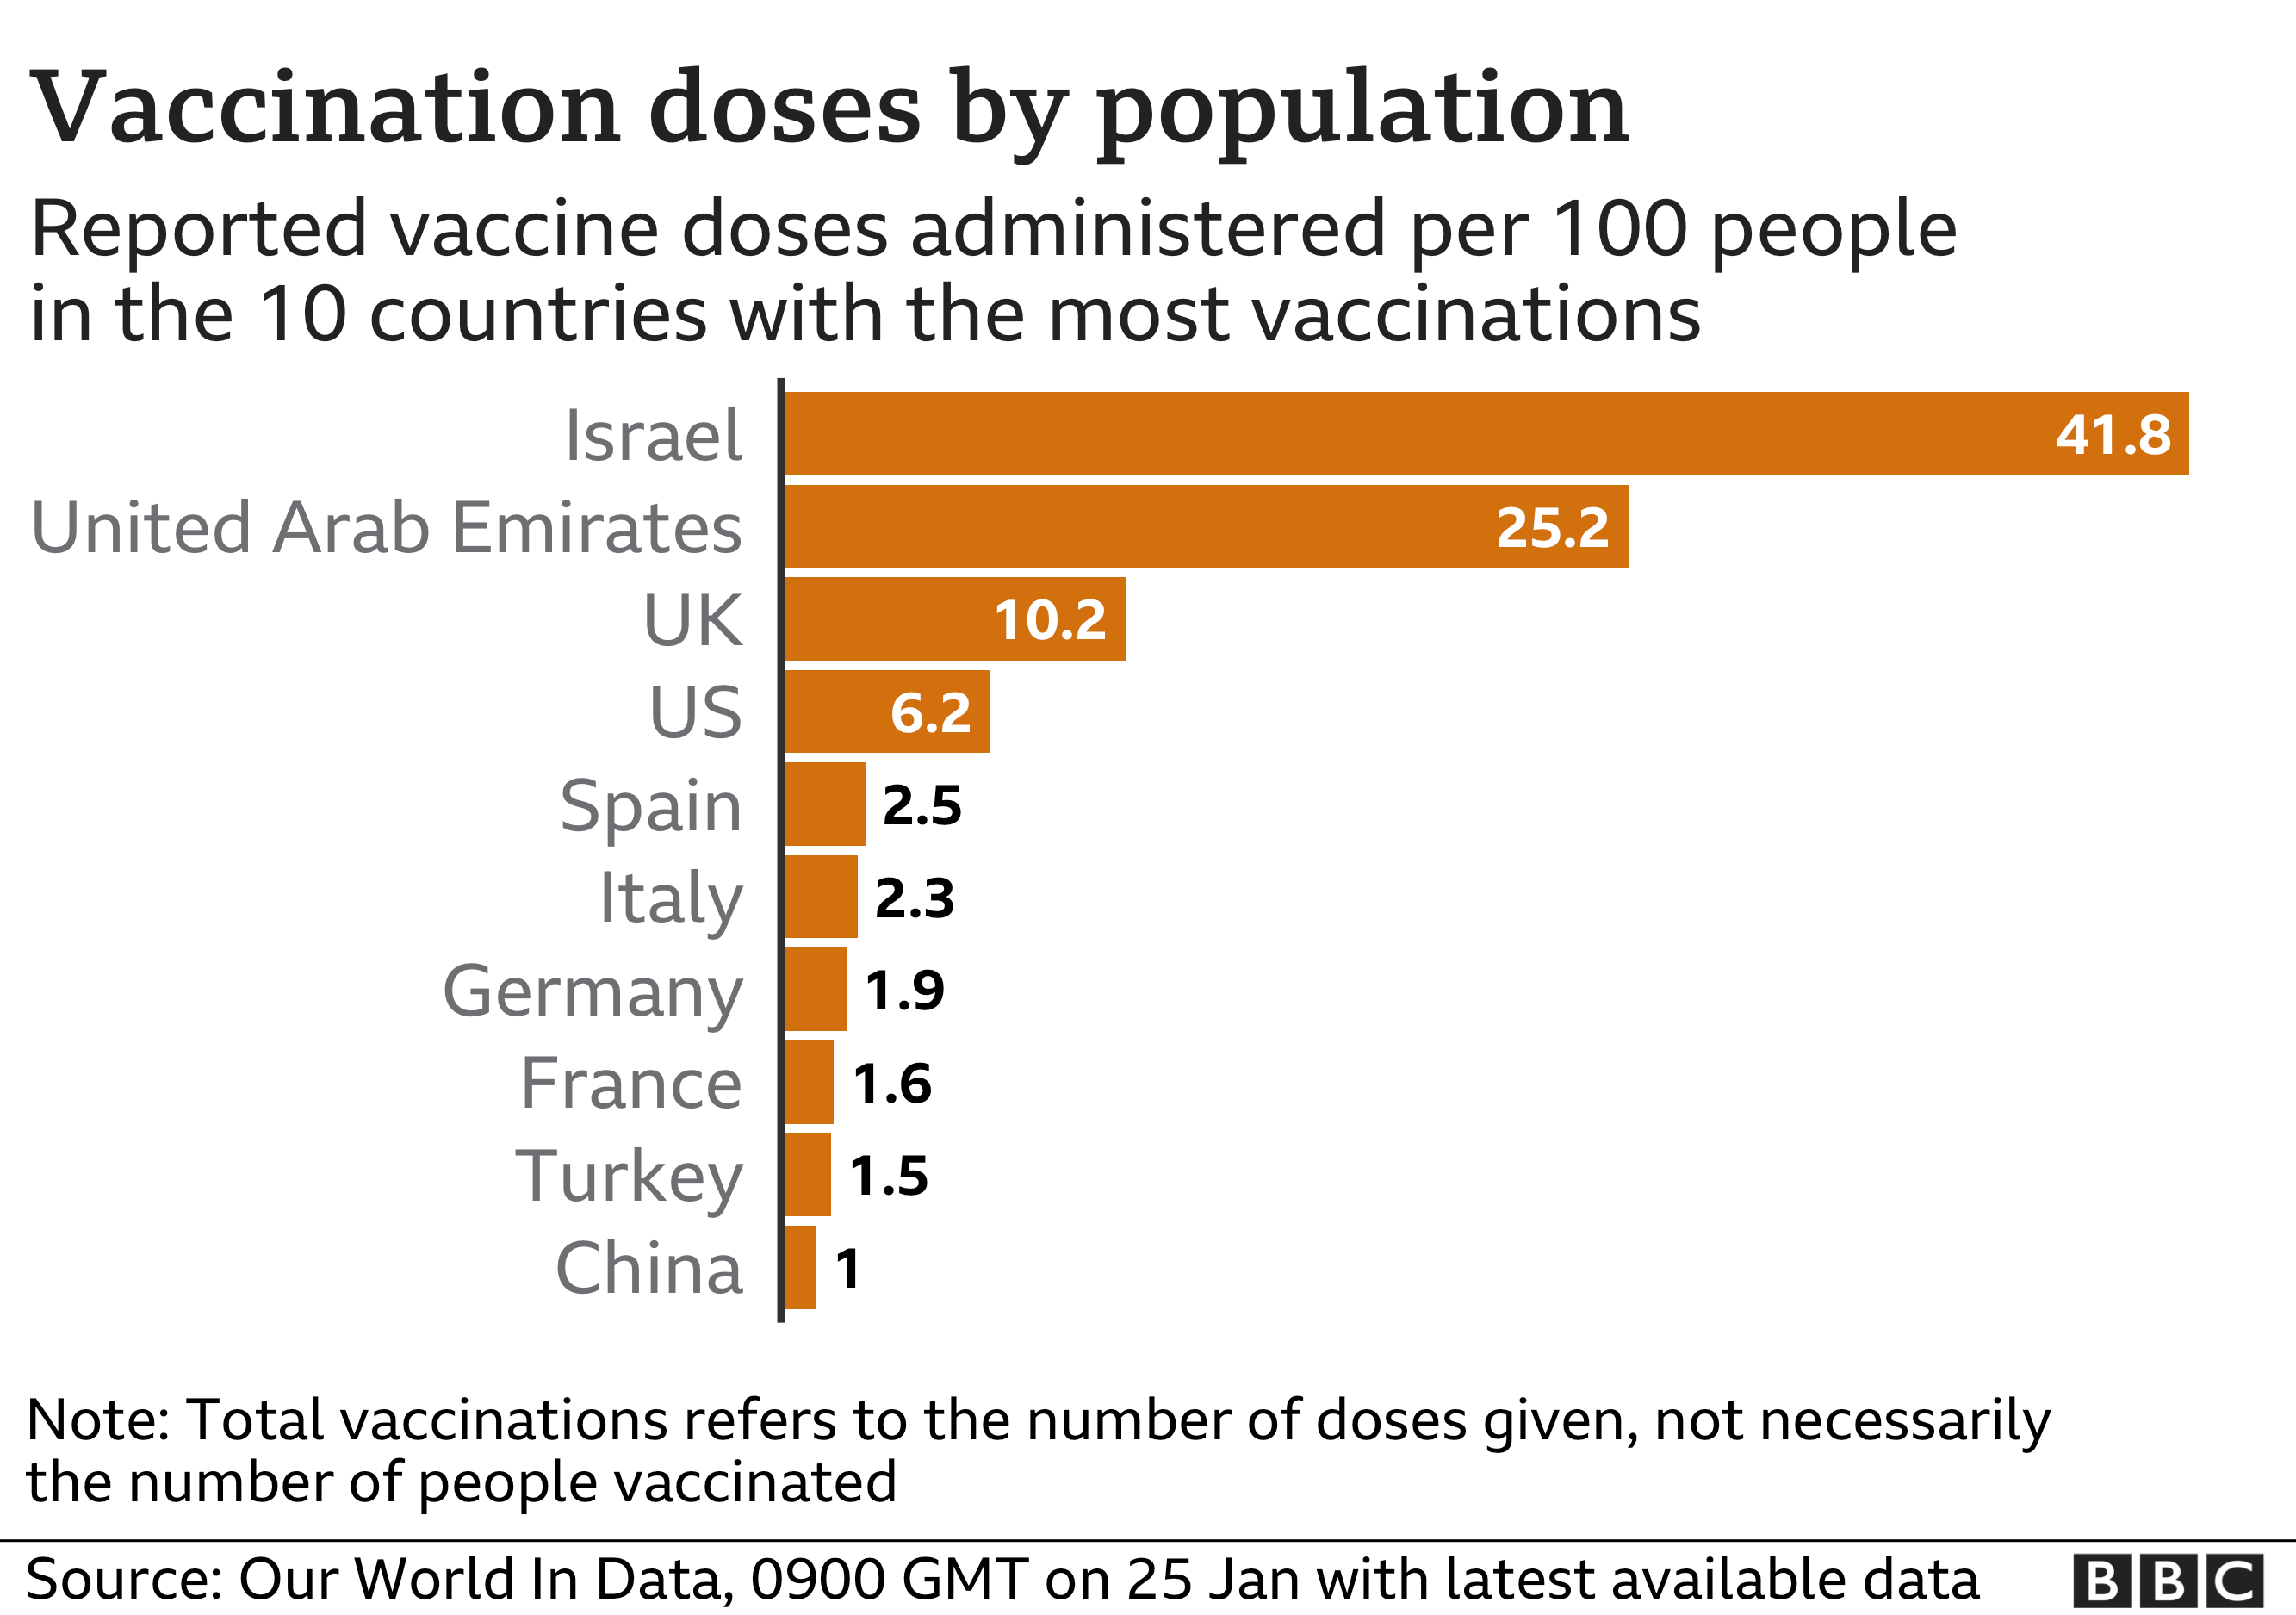 Chart shows doses administered per 100 people in 10 countries with most vaccinations. Updated 25 Jan.